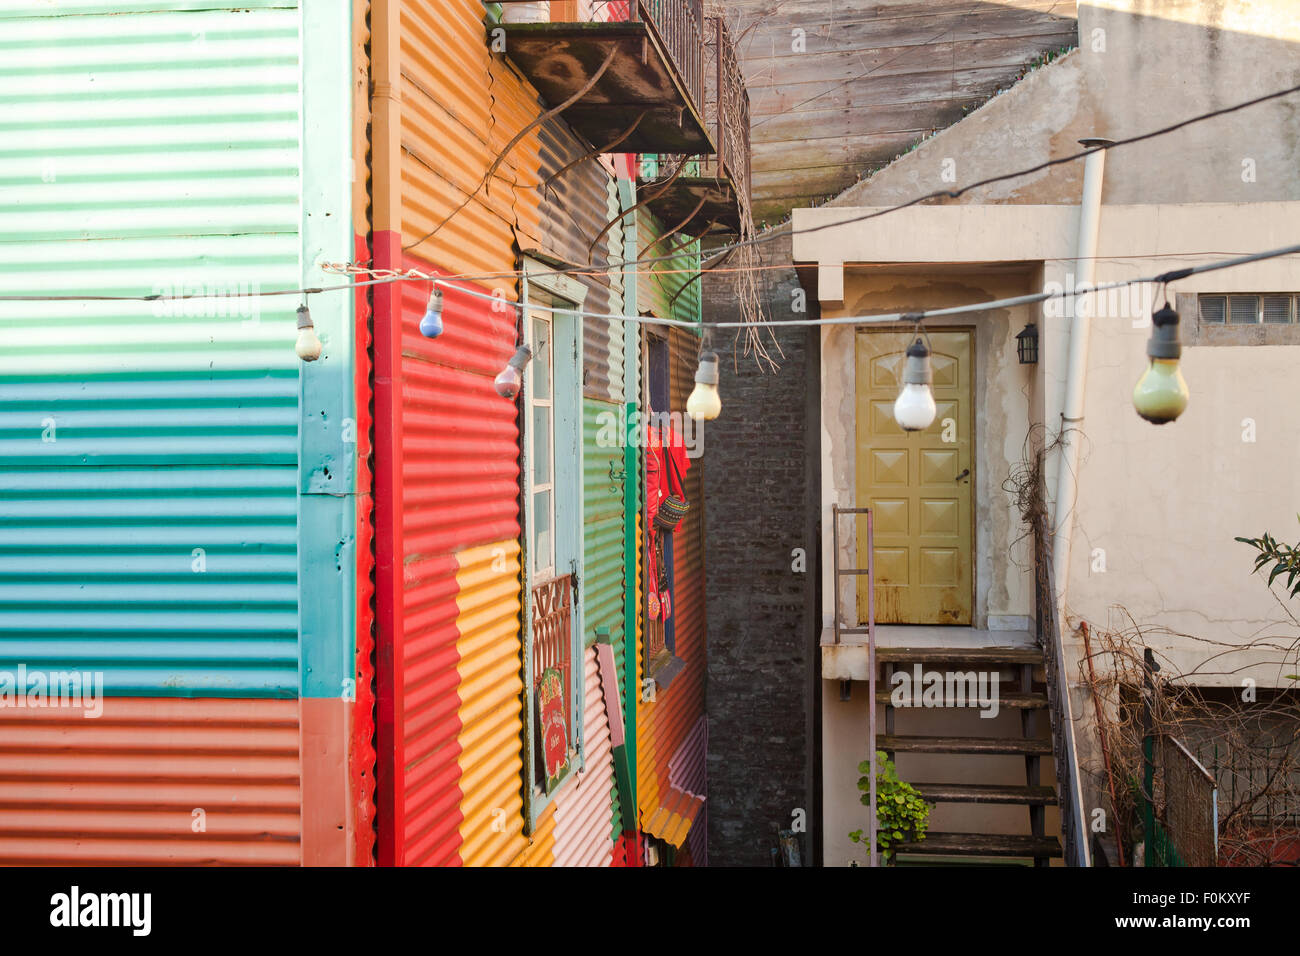 Caminito street colorful houses and architecture in La boca town neighborhood, Buenos Aires, Argentina Stock Photo